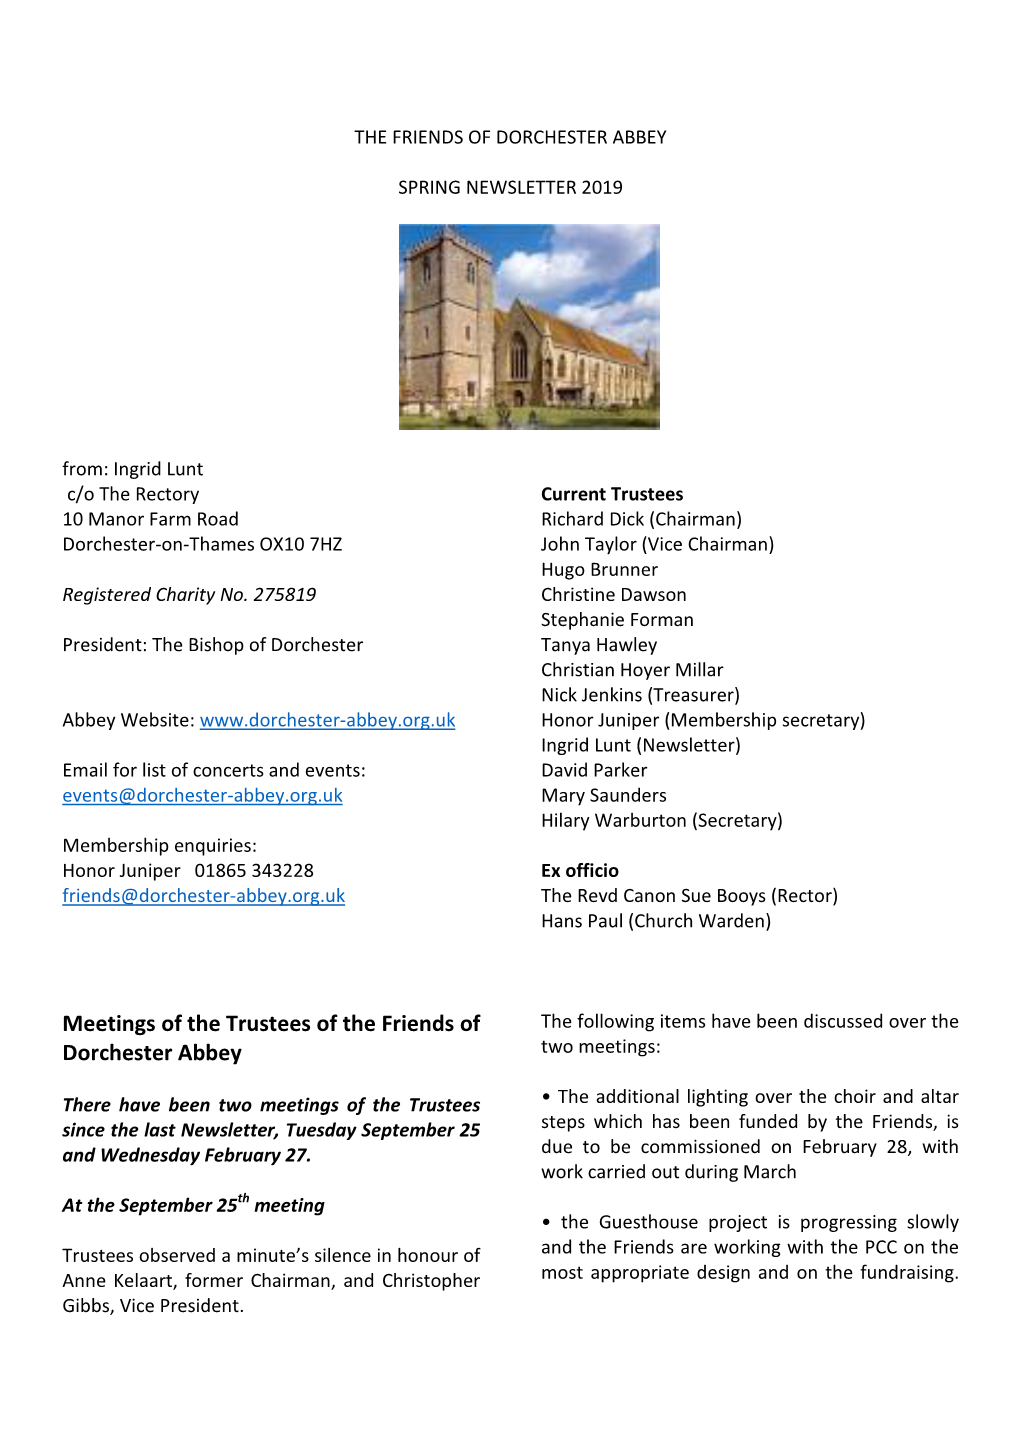 Meetings of the Trustees of the Friends of Dorchester Abbey